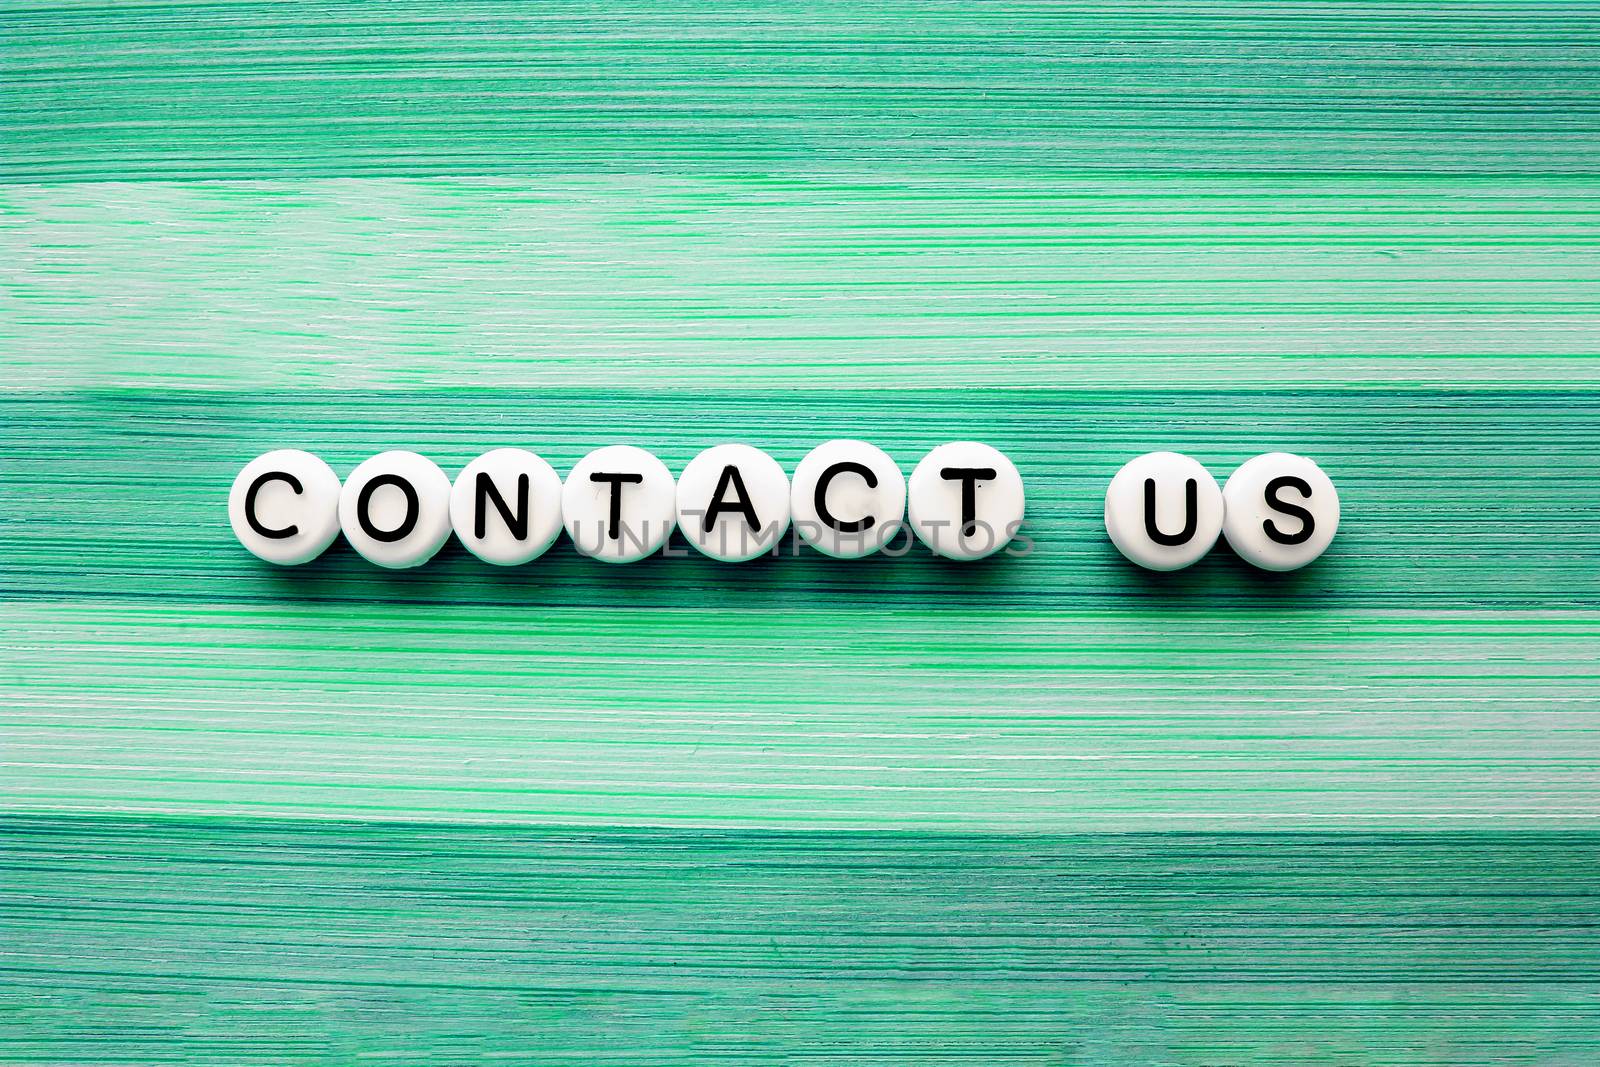 Contact us text on a green wooden table by oasisamuel